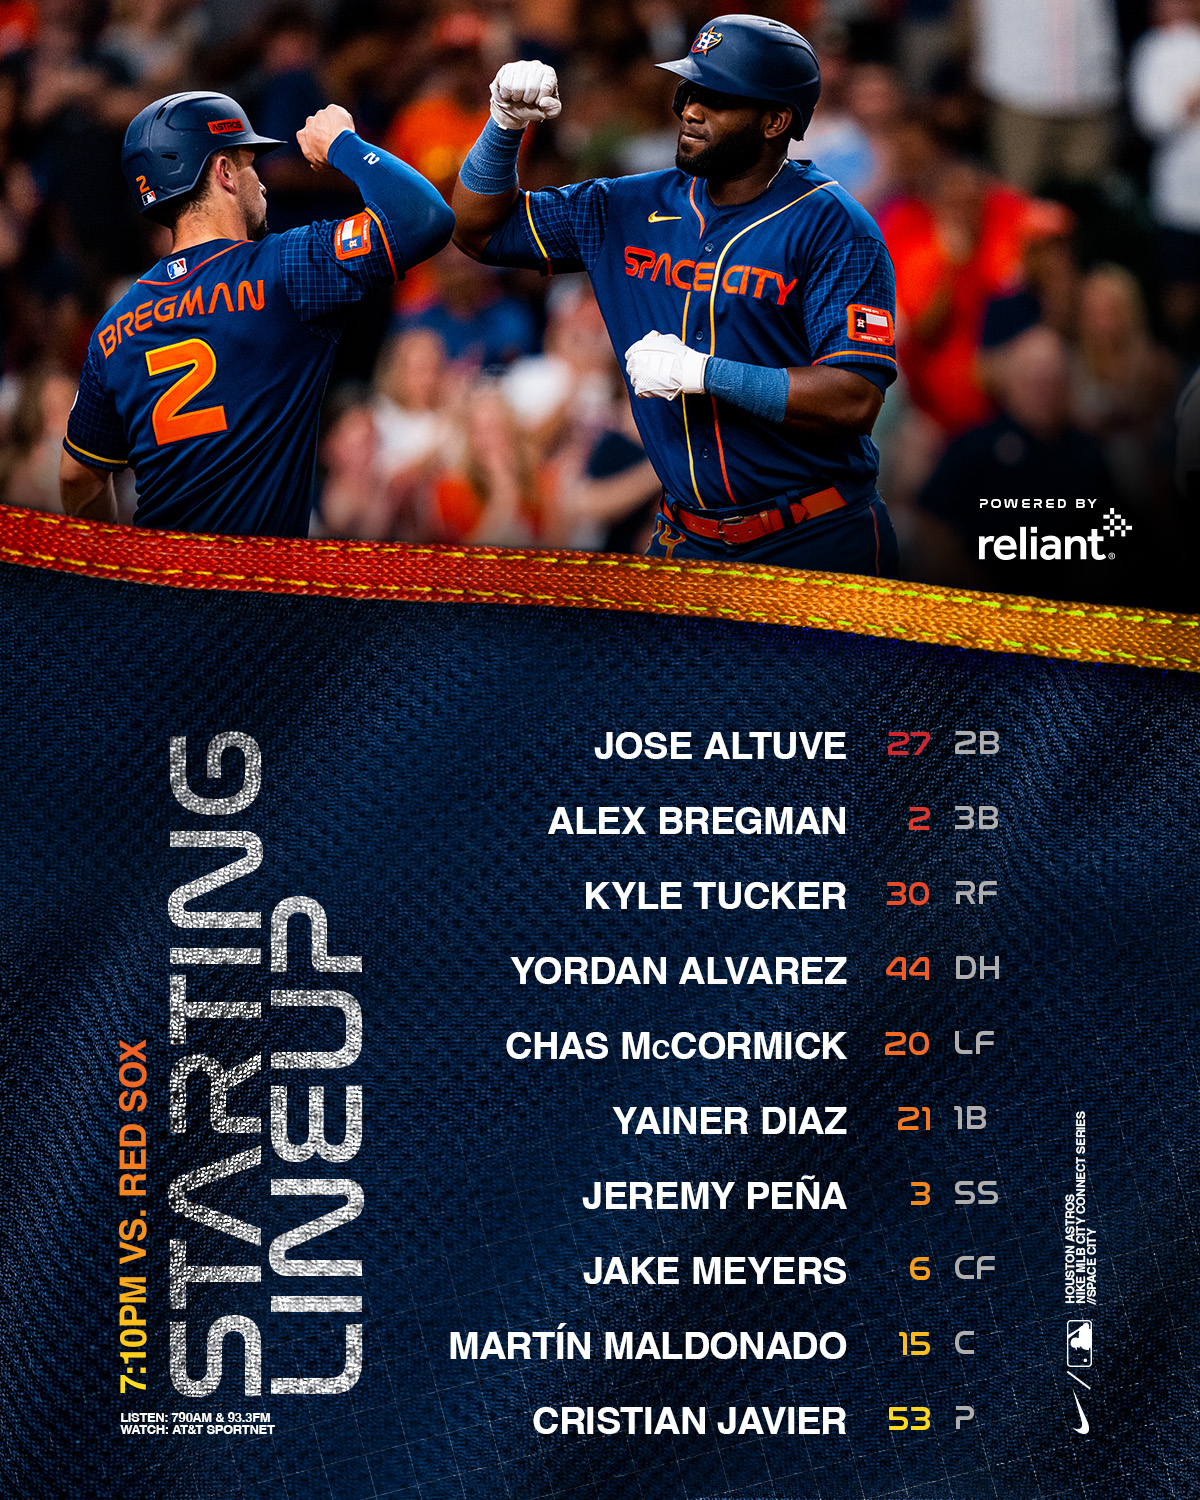 Who is starting for Astros in CF?